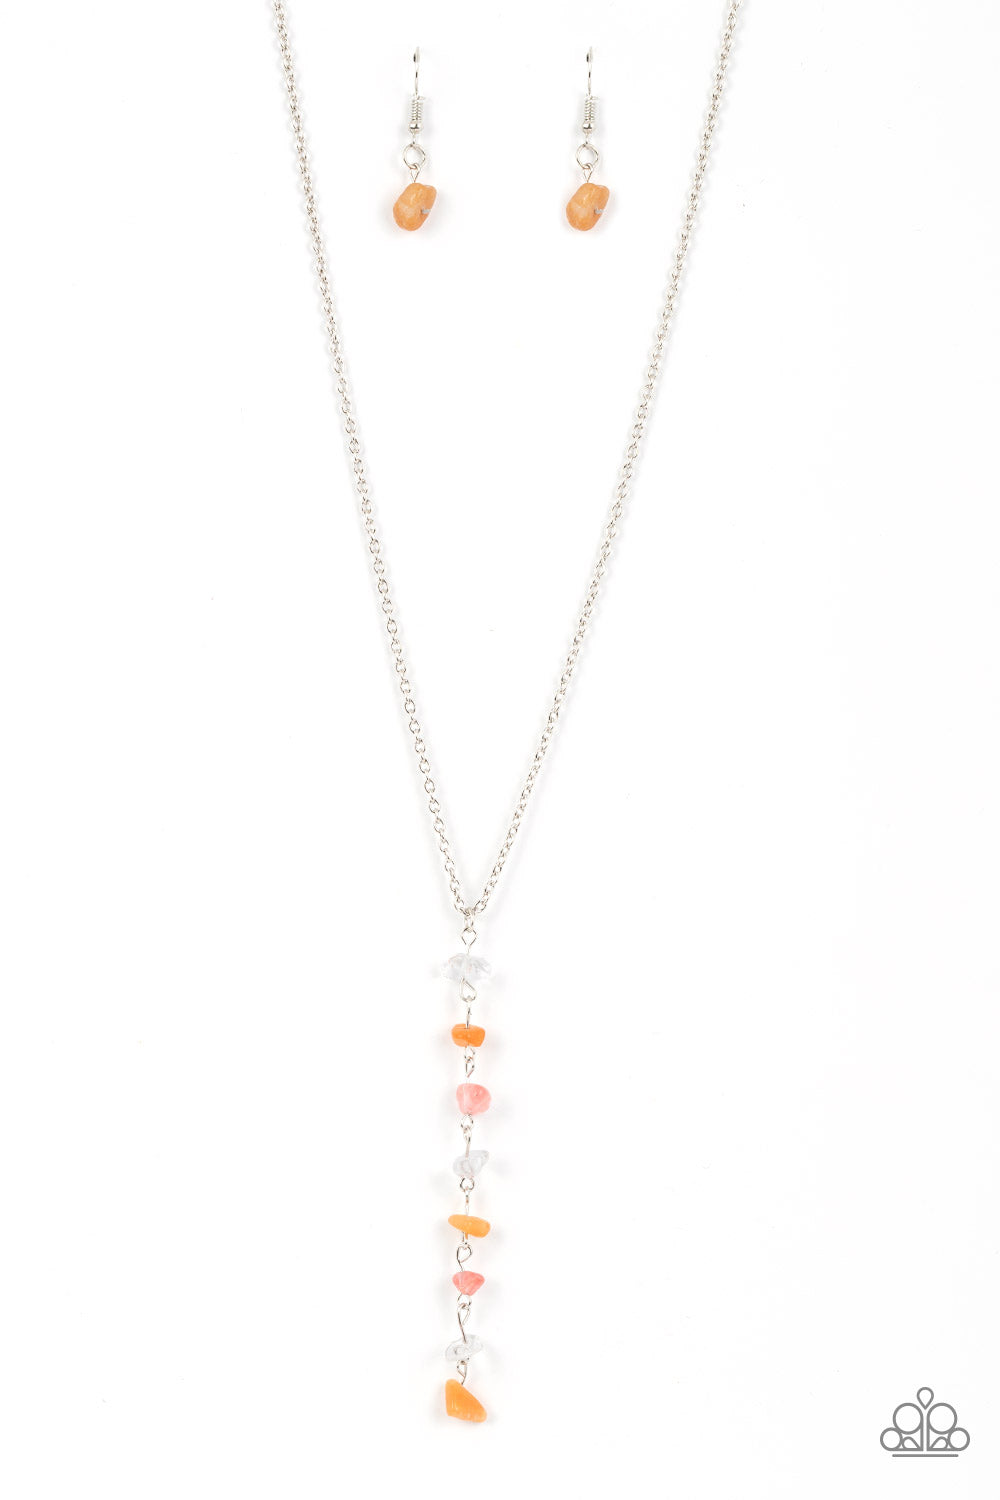 Tranquil Tidings - Orange Necklace - Paparazzi Accessories - Alies Bling Bar